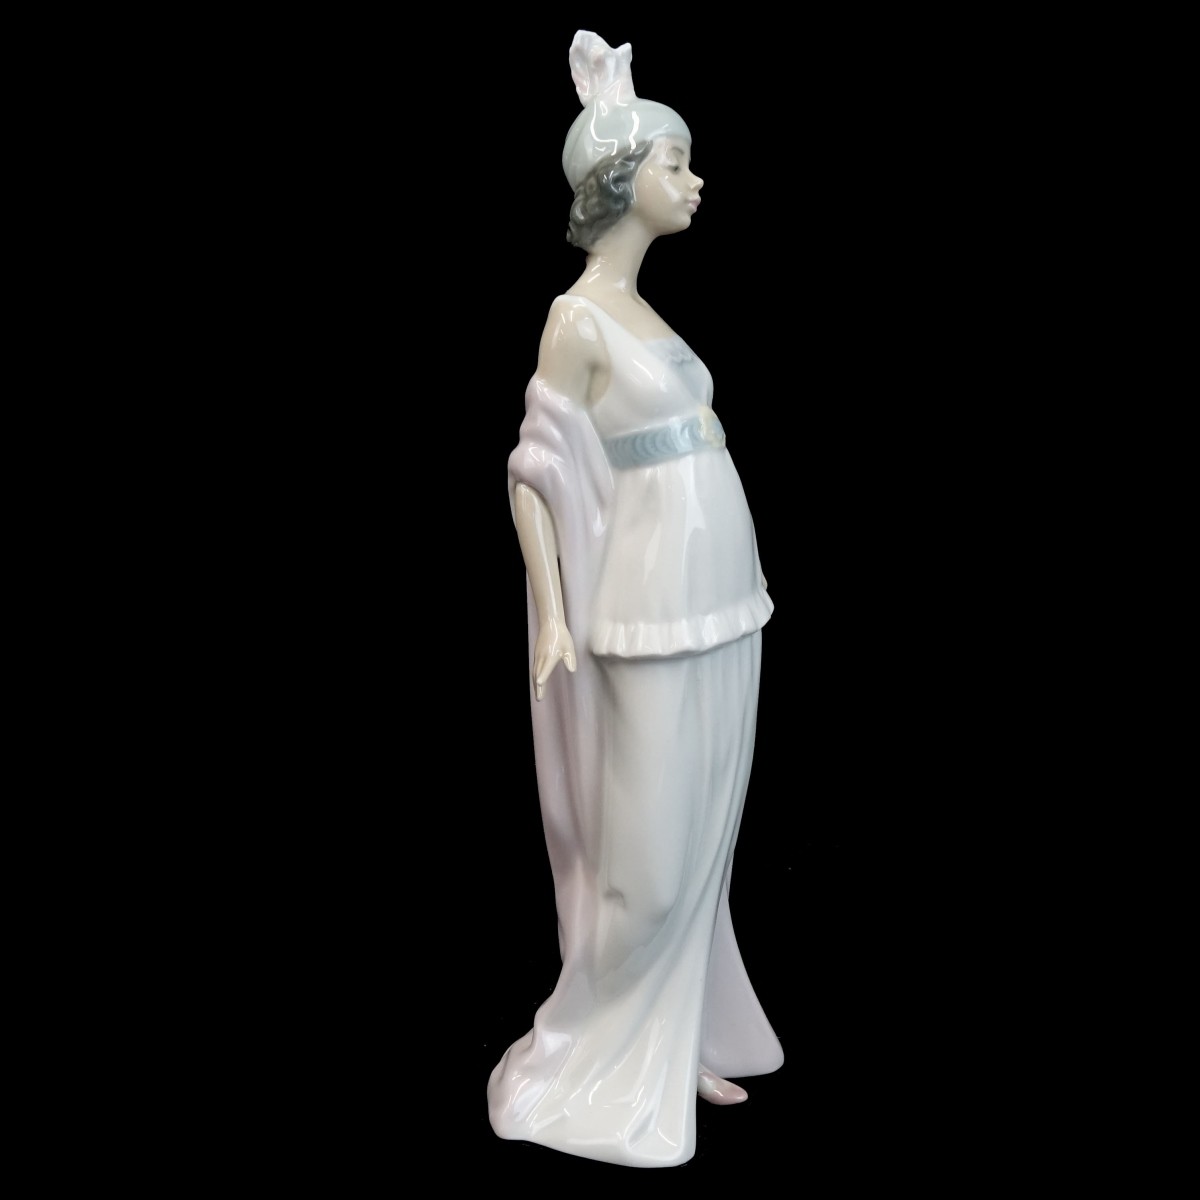 Lladro "Talk of the Town" Glazed Porcelain